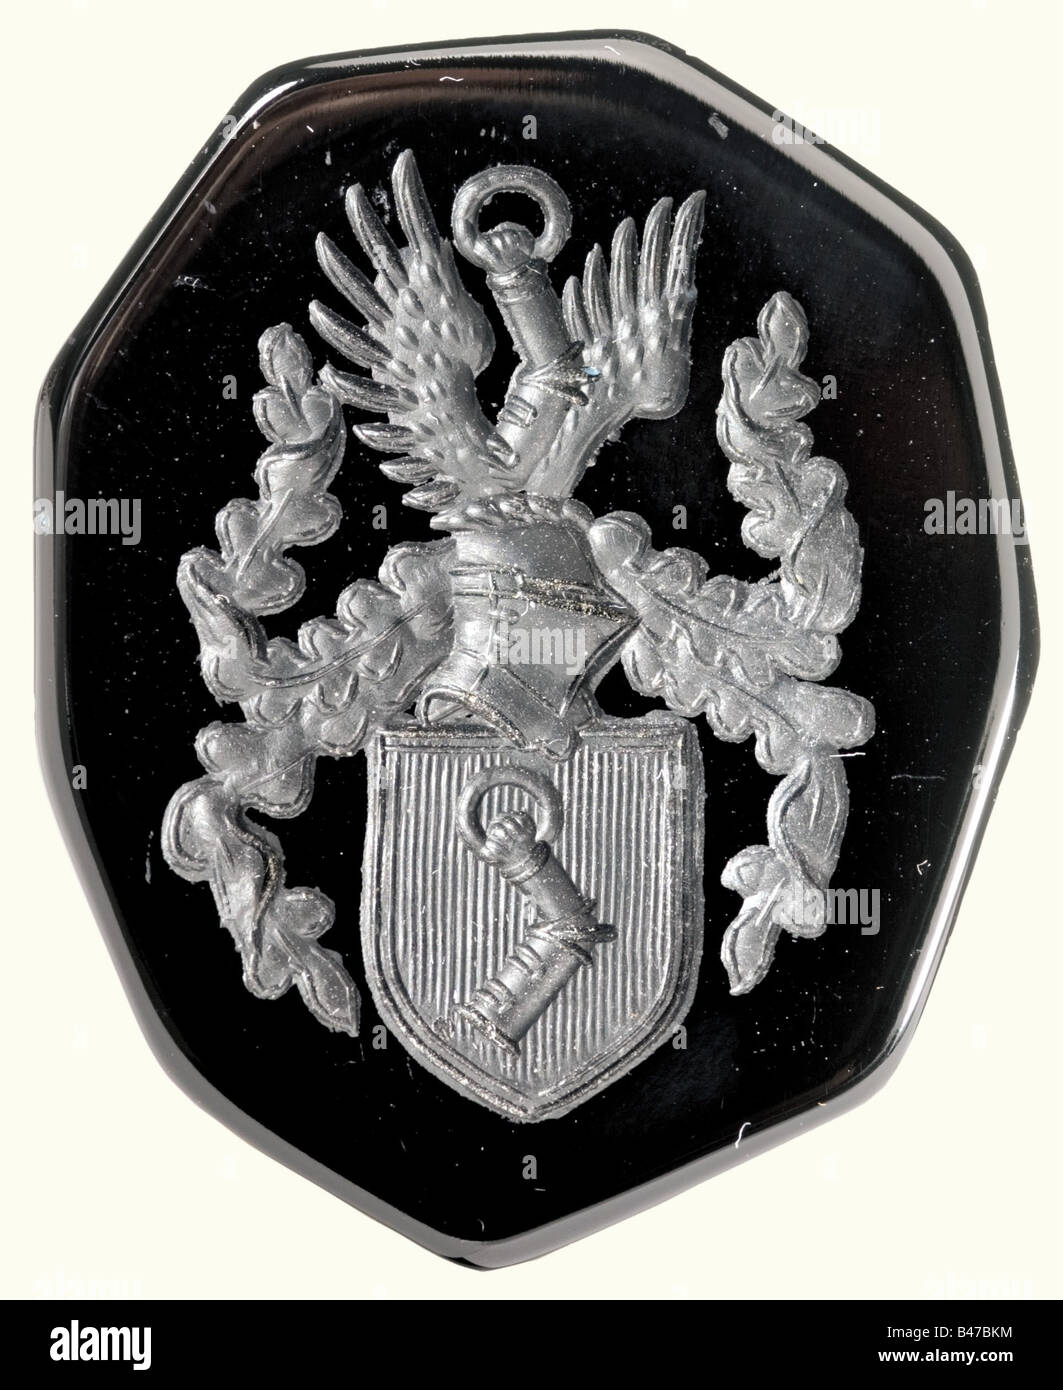 Hermann Göring, an onyx seal bearing his coat of arms The seal is in the shape of the armoured arm from Göring's coat of arms, the ring is silver with the hallmark '800' next to the crown and crescent moon. Göring's helmeted coat of arms is very beautifully cut into the surface of the seal. Total height 106 mm. There is also confirmation from Göring's favorite goldsmith, Prof. Herbert Zeitner, that the seal was made in the W. Brendel factory in Berlin from a design by Hermann Göring and Mr. Rothemund. Rupert Kohlrus did the polishing and cutting there and the M, Stock Photo